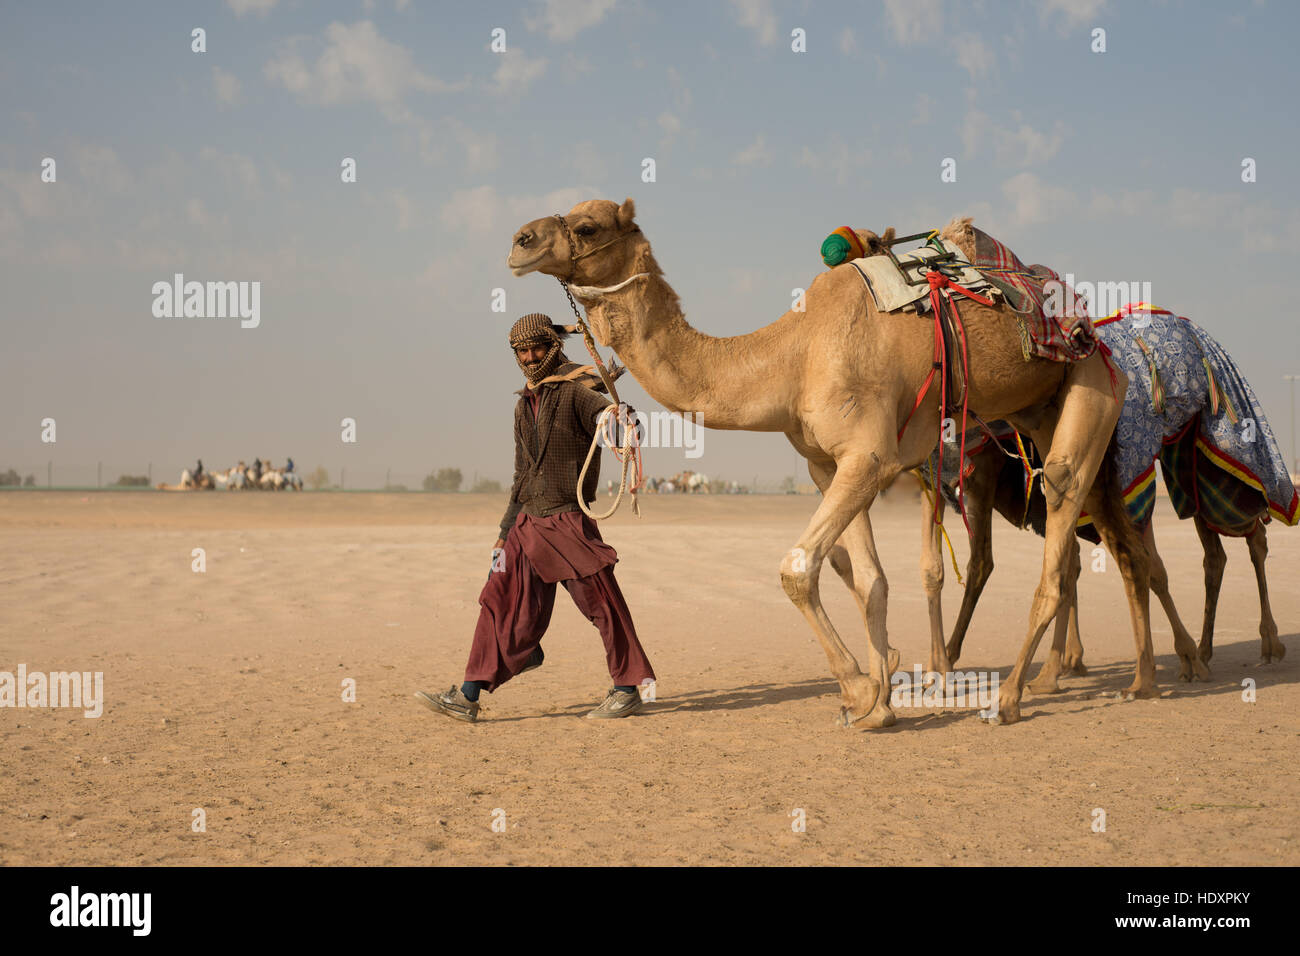 Camel herder walking with camels, Dubai Stock Photo